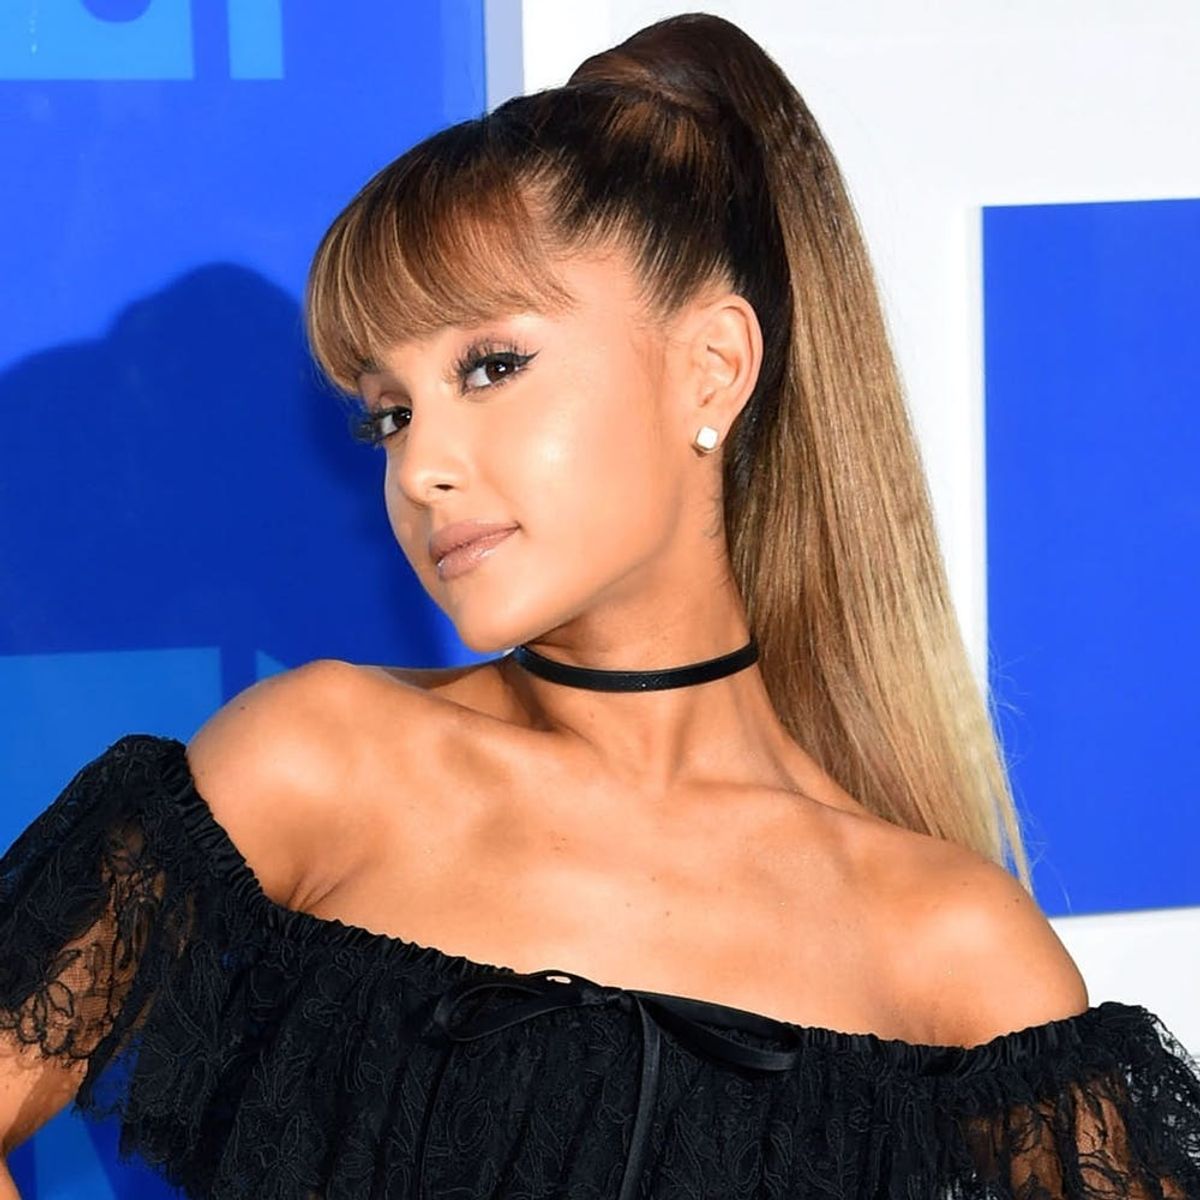 Ariana Grande Just Broke Her 4-Month Social Media Silence to Tease New Music